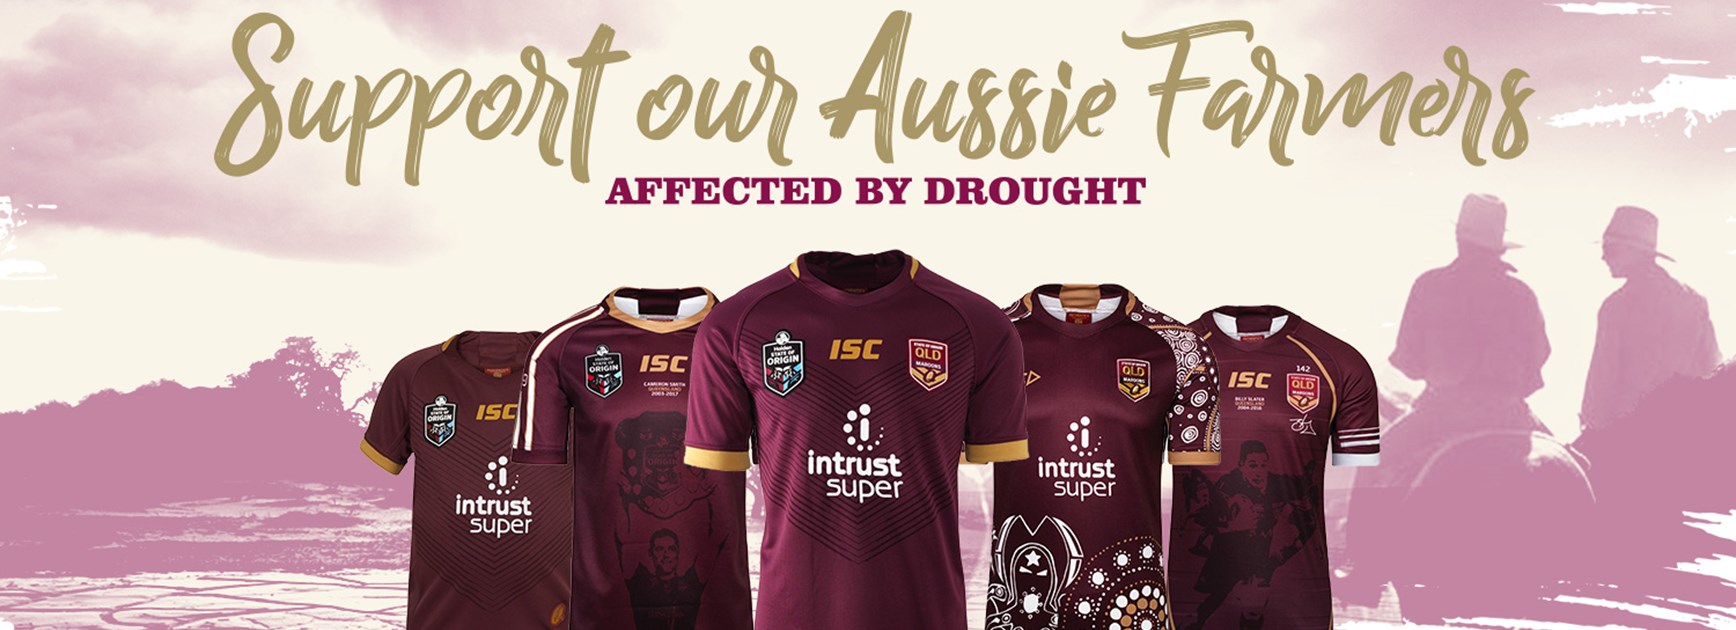 Maroons jersey sales to support Aussie farmers